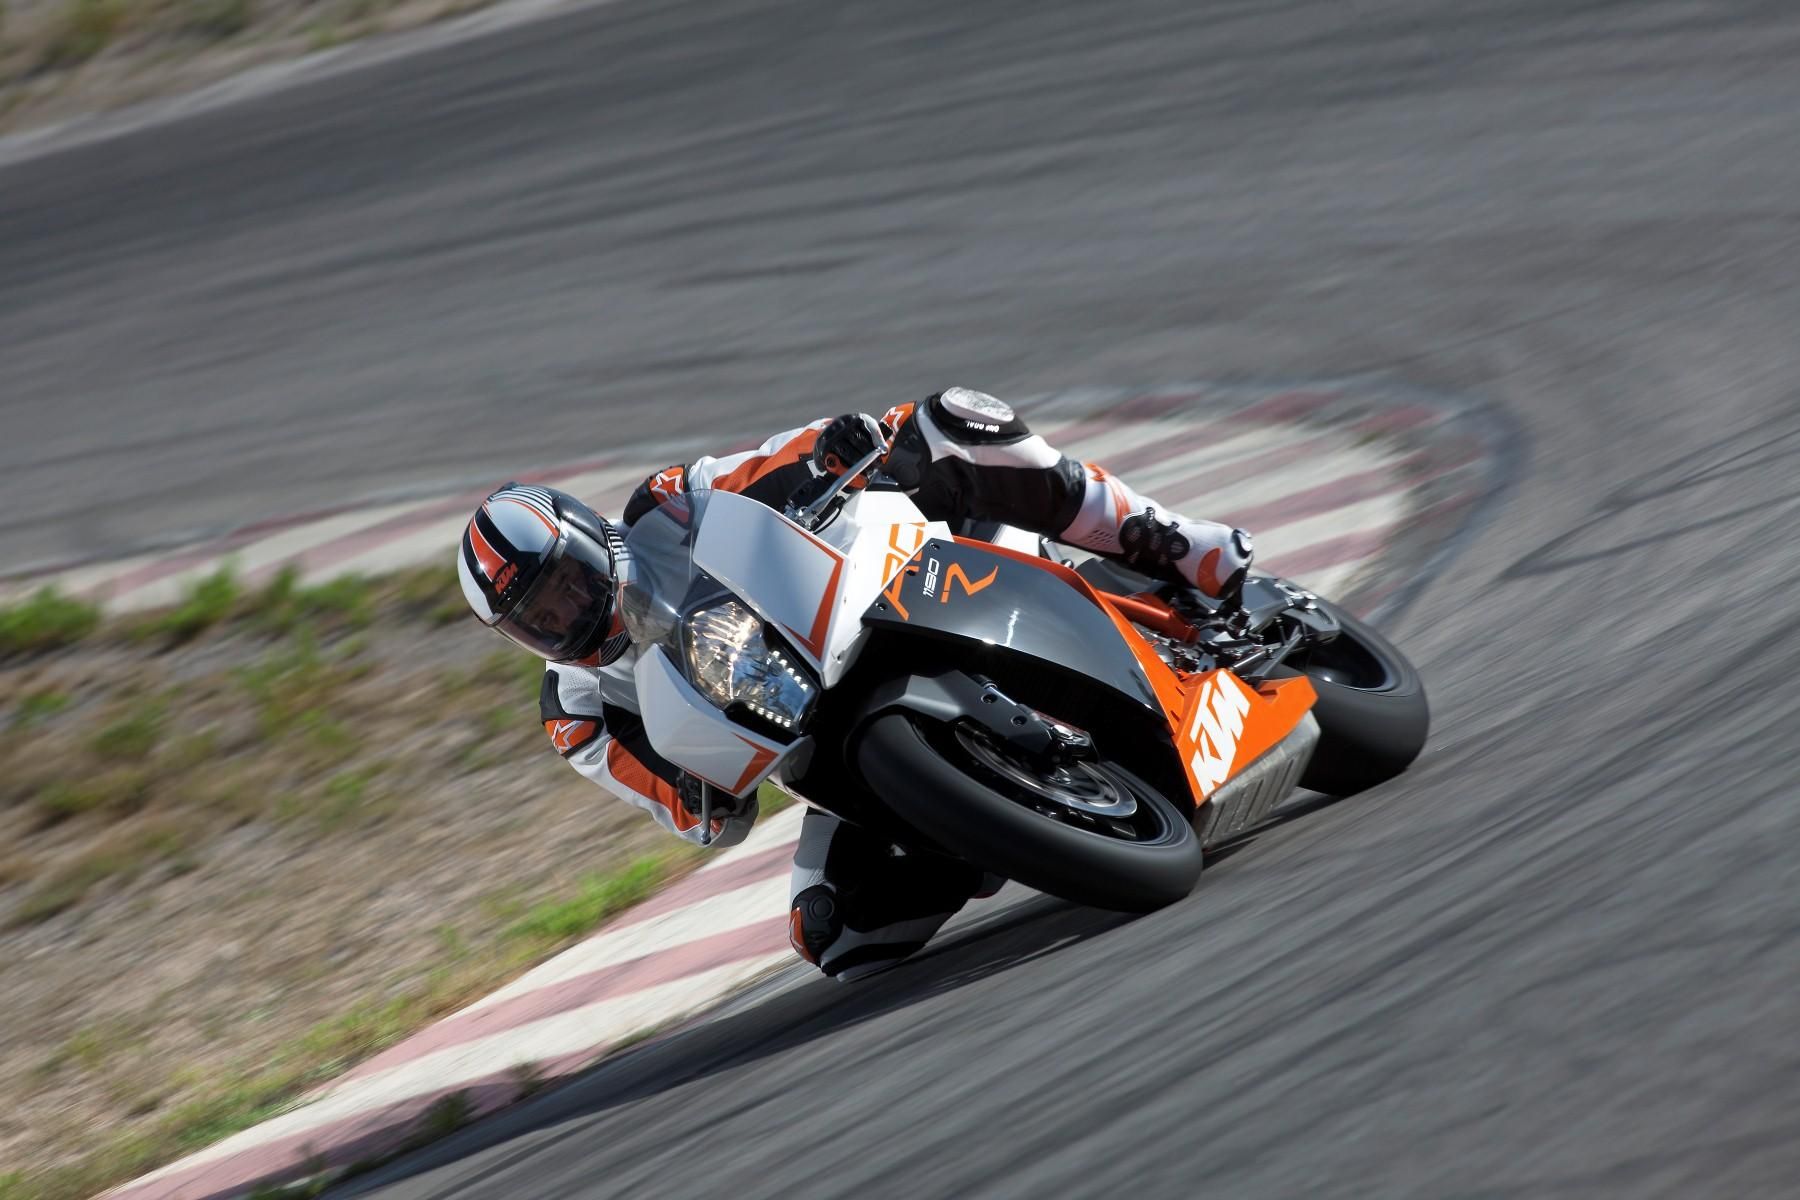 2013 KTM 1190 RC8 R in action 3